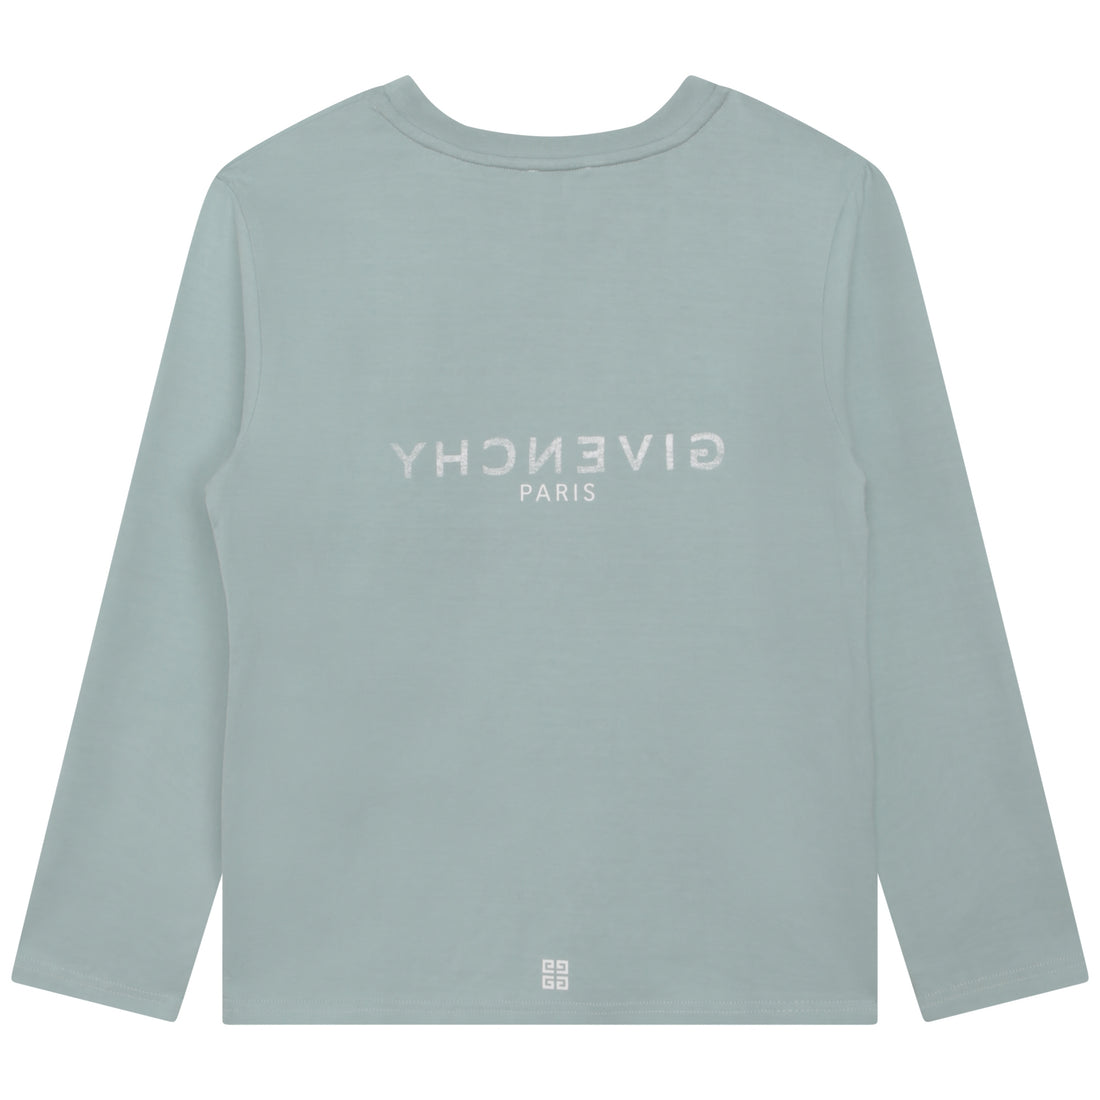 Givenchy Long Sleeve T-Shirt Style: H25448